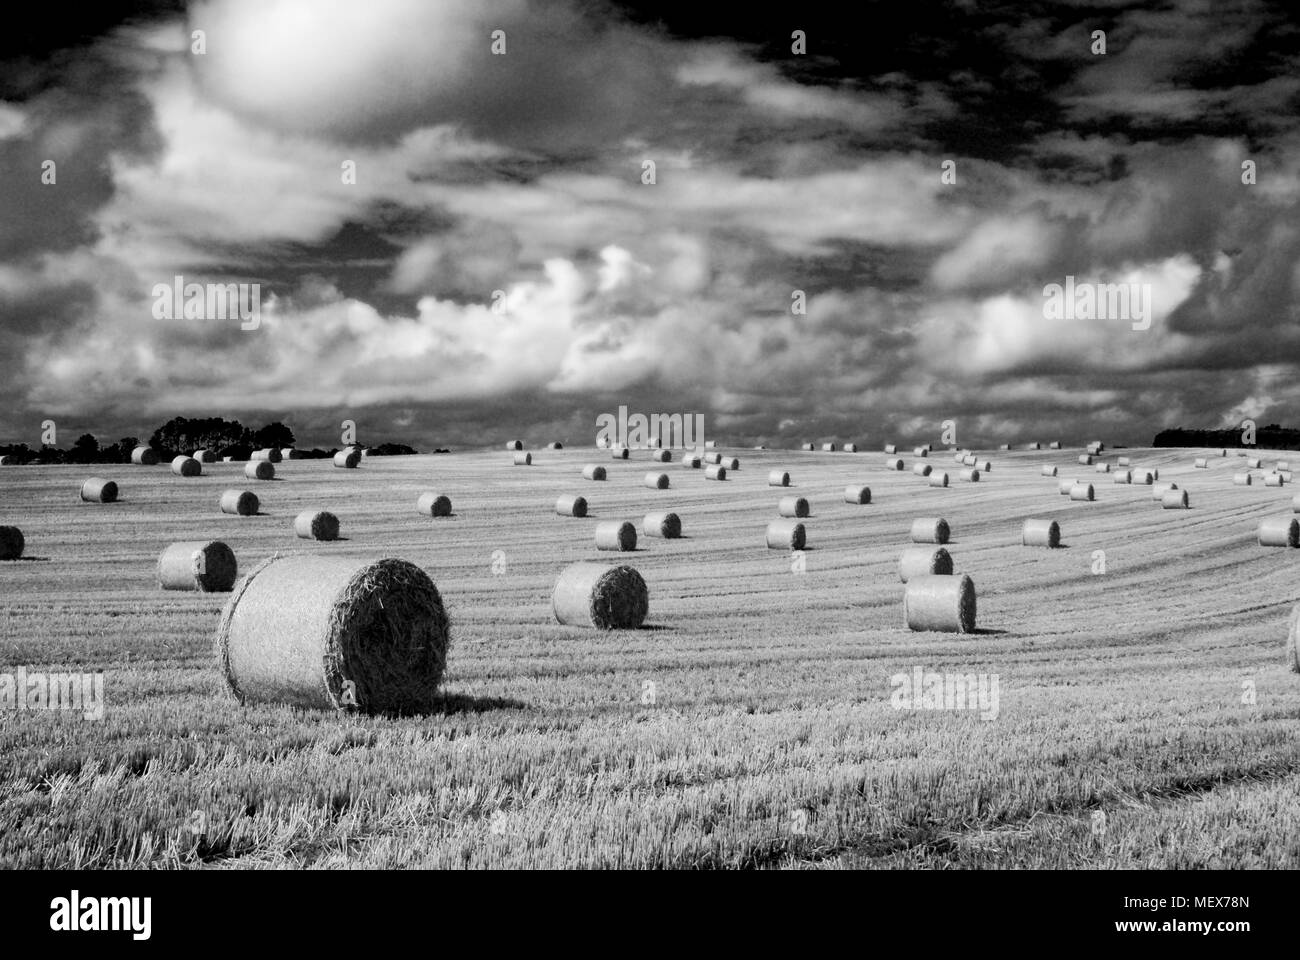 Black and White of bales of Hay Barley or Straw in a sloping field with clouds and dramatic sky Stock Photo